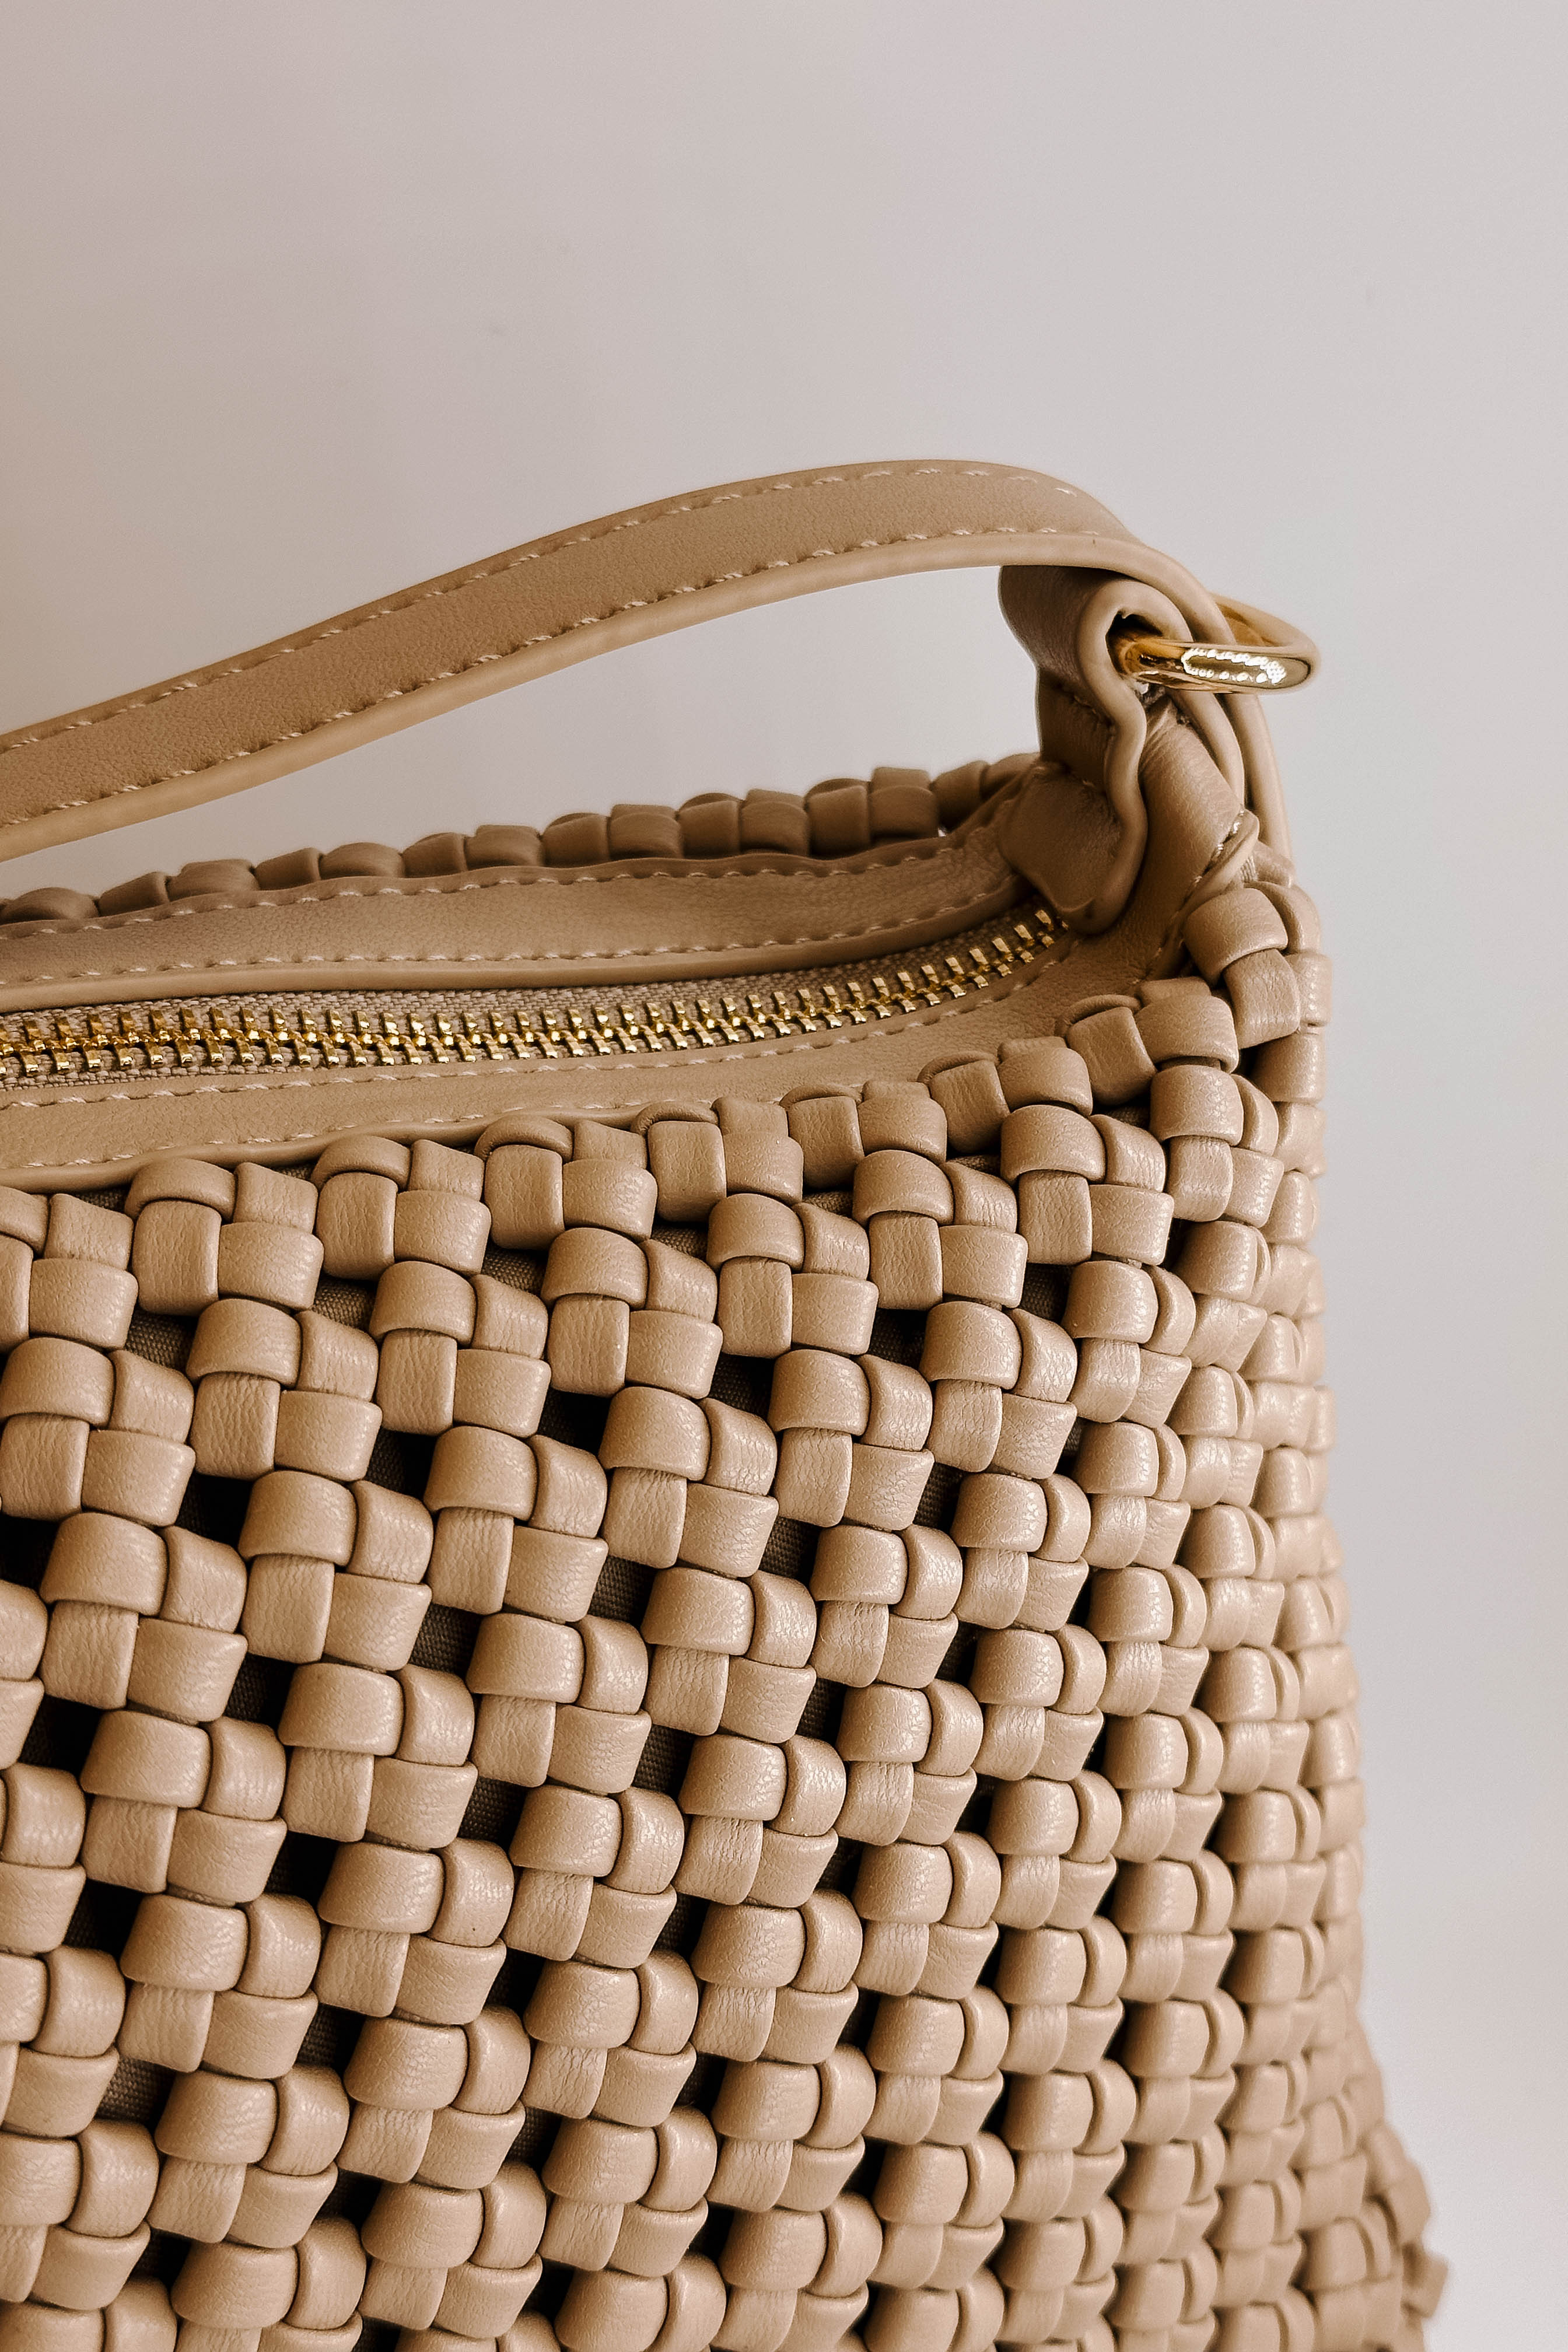 Close detailed front view of the Naya Beige Woven Purse.  It has dark beige faux-leather material with a woven design, short and long removable straps, gold hardware, and a patterned interior with a zippered pocket and a slit pocket.